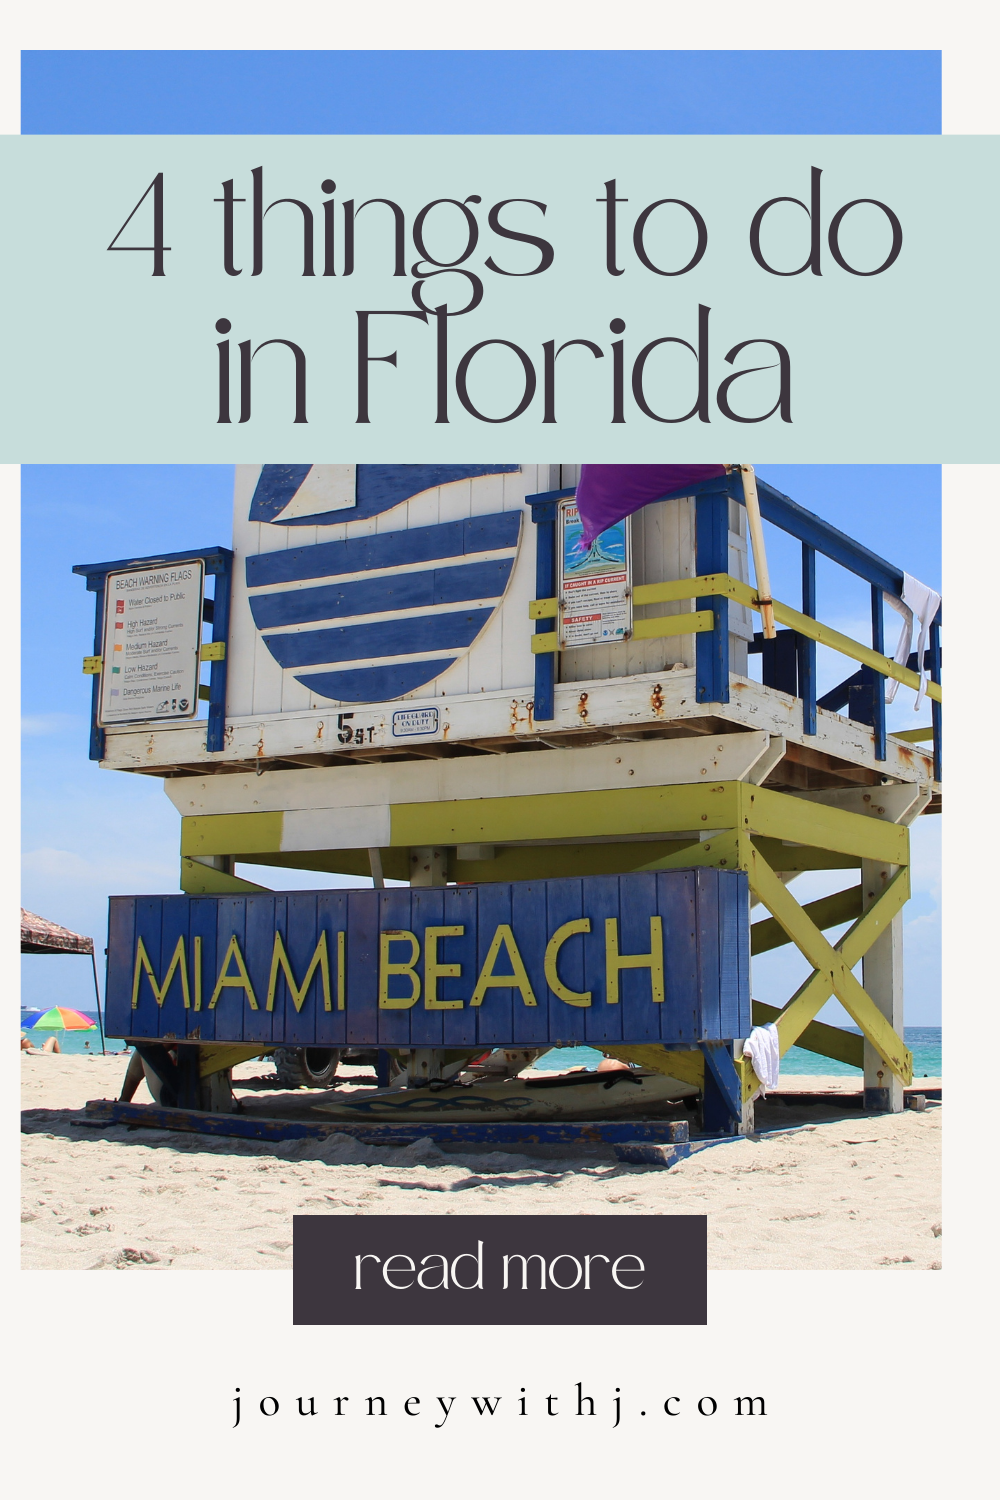 4 things to do in Florida